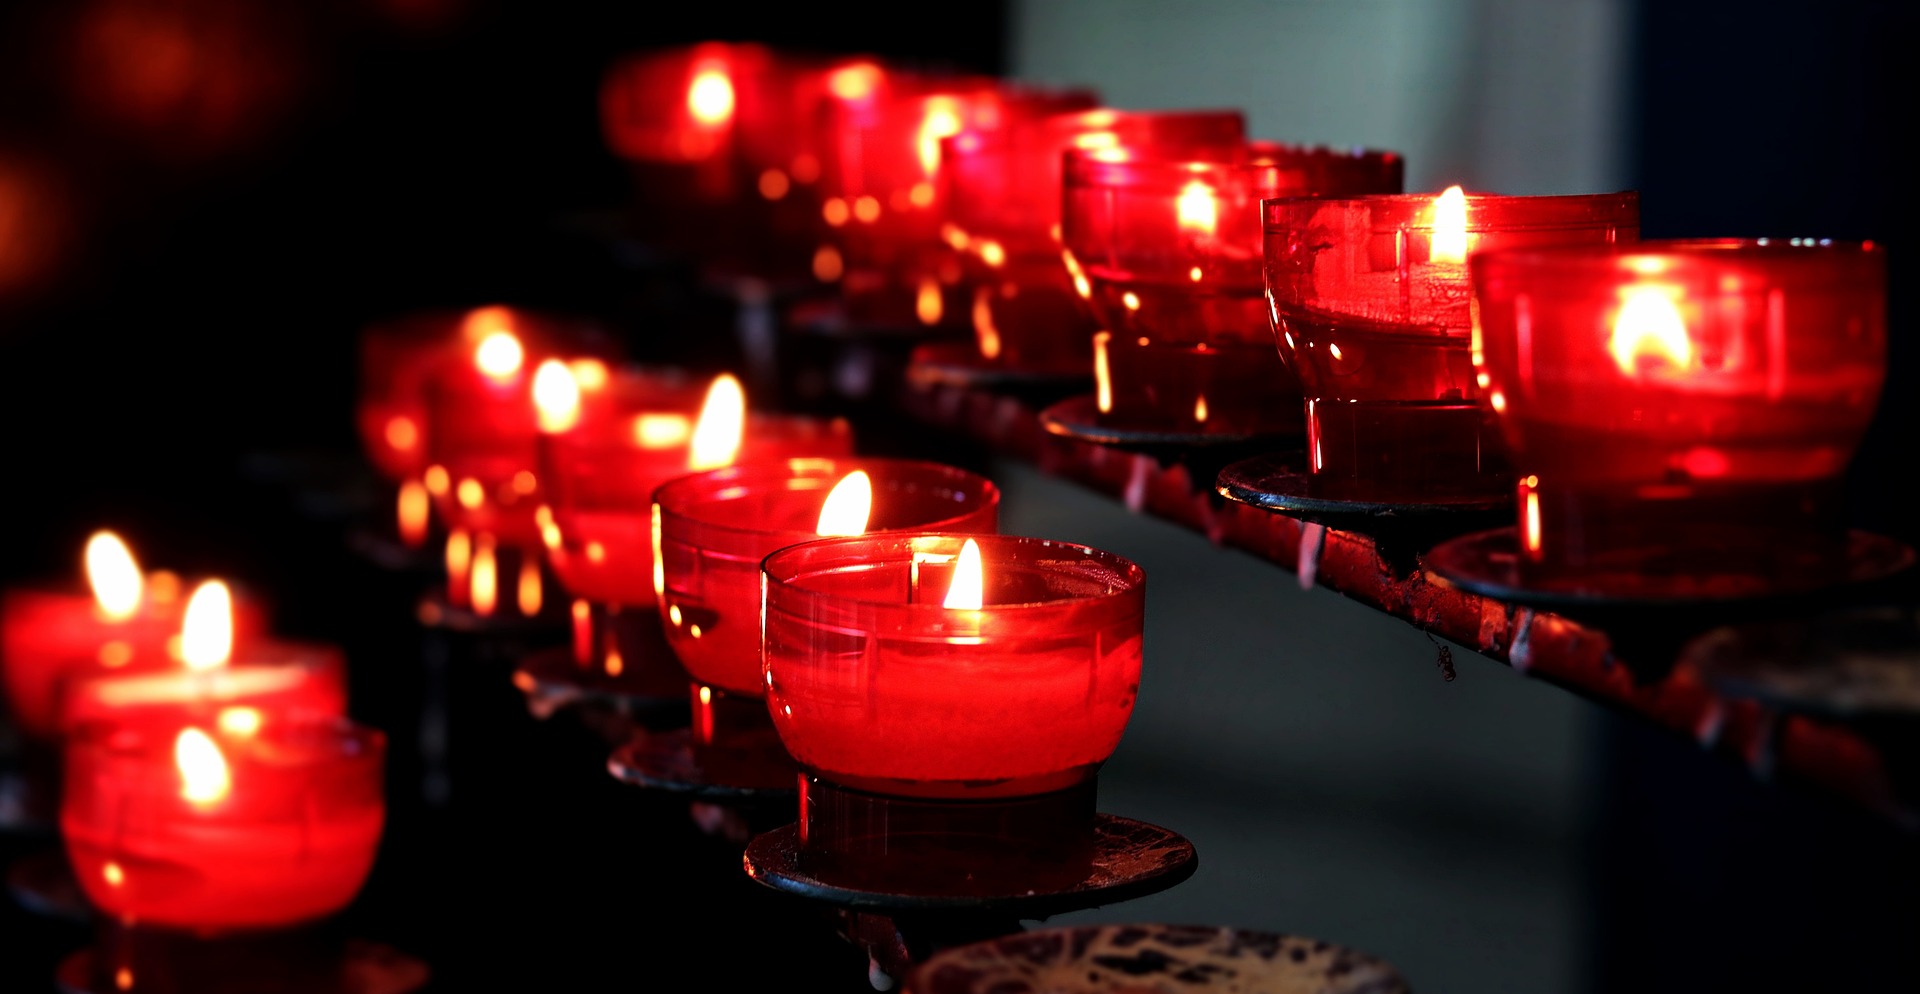 candles in a church